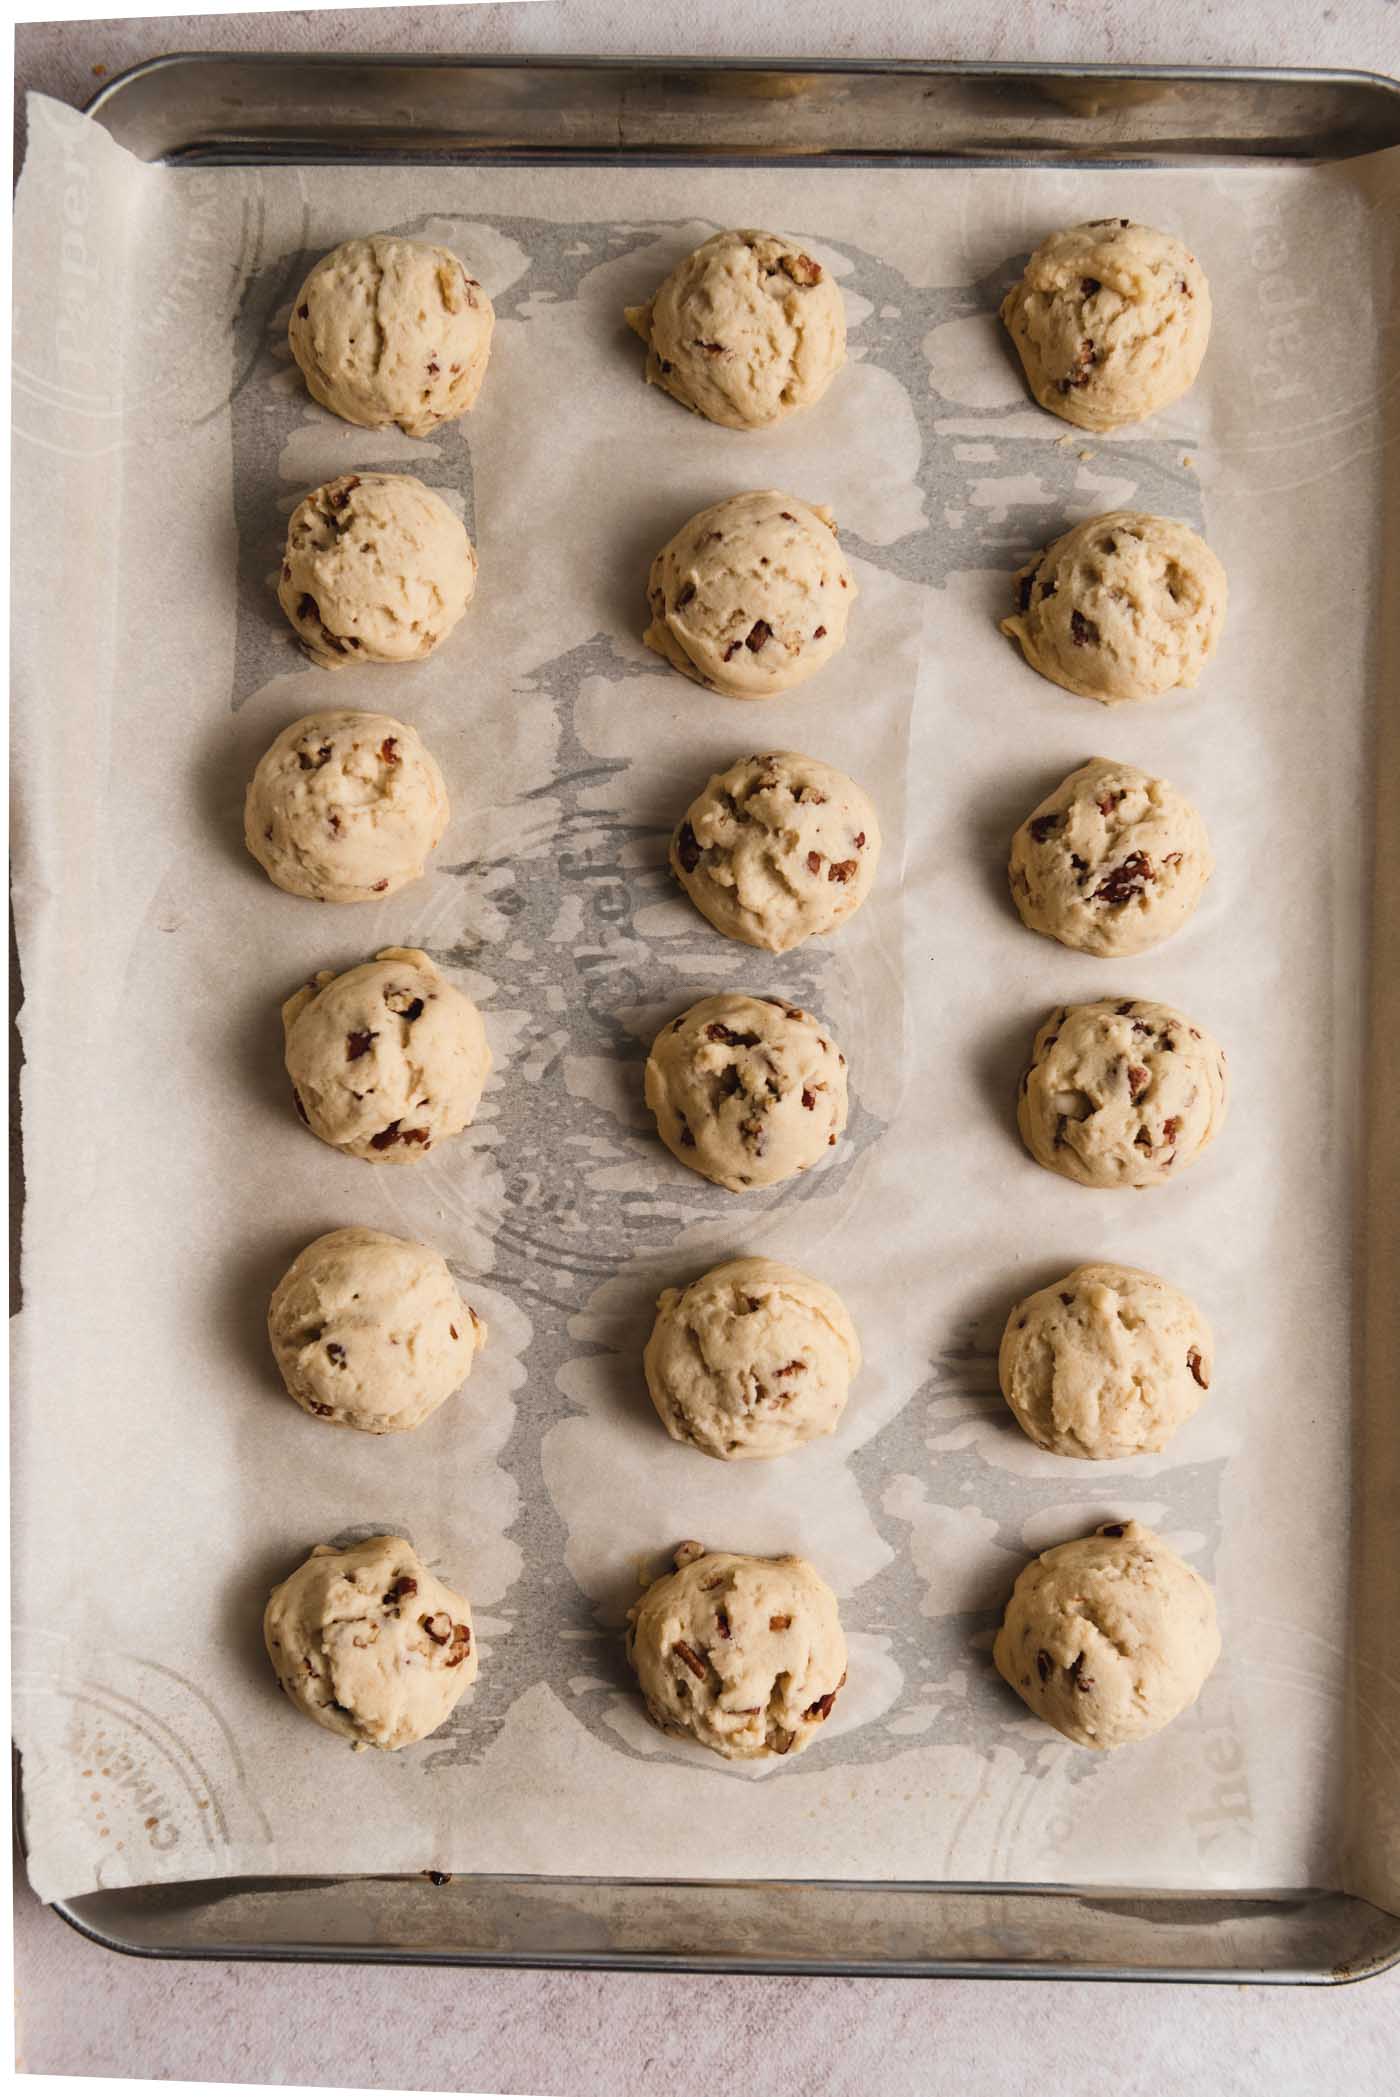 18 baked pecan snowball cookies on a baking tray lined with parchment paper.